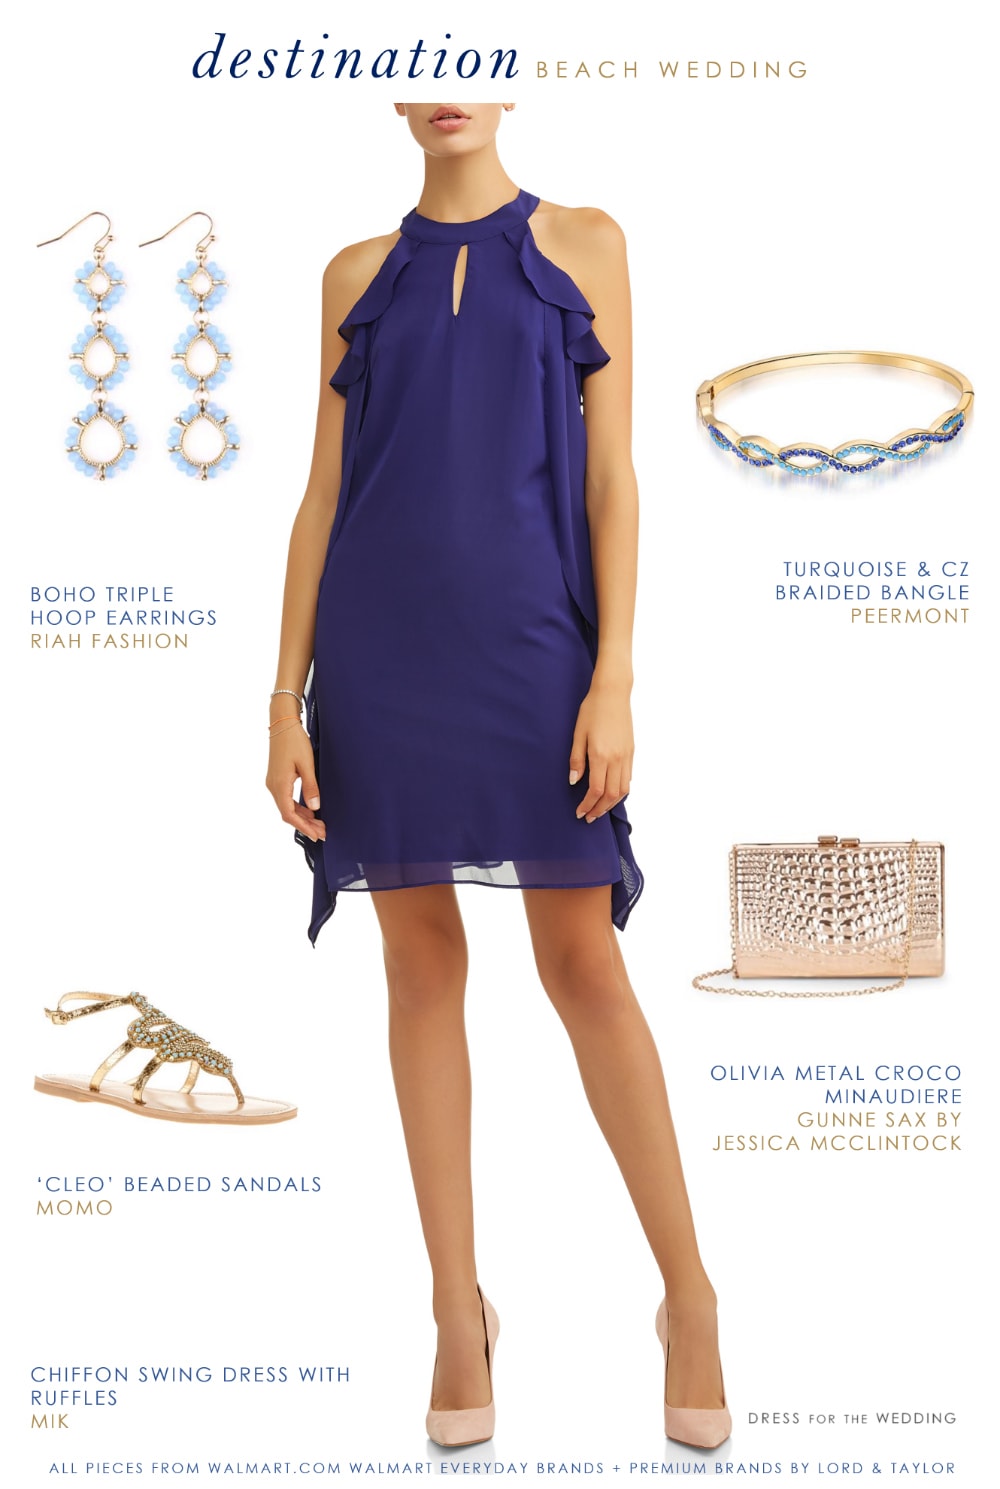 Winter Wedding Guest Outfits from Walmart - Dress for the Wedding